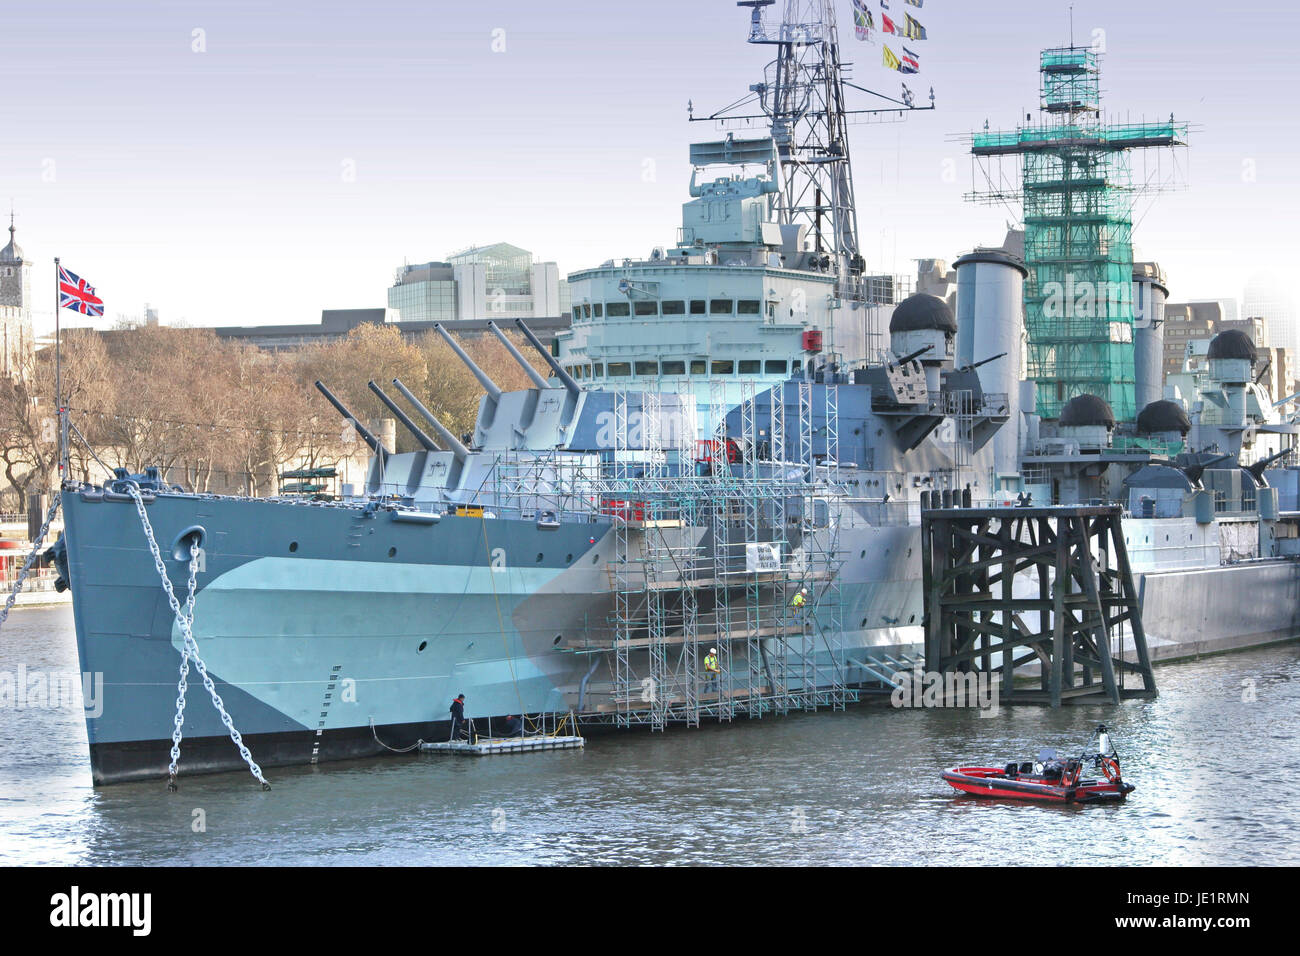 Scaffolding is suspended along the hull of museum ship HMS Belfast on the River Thames in London allowing painting and maintenance. Stock Photo